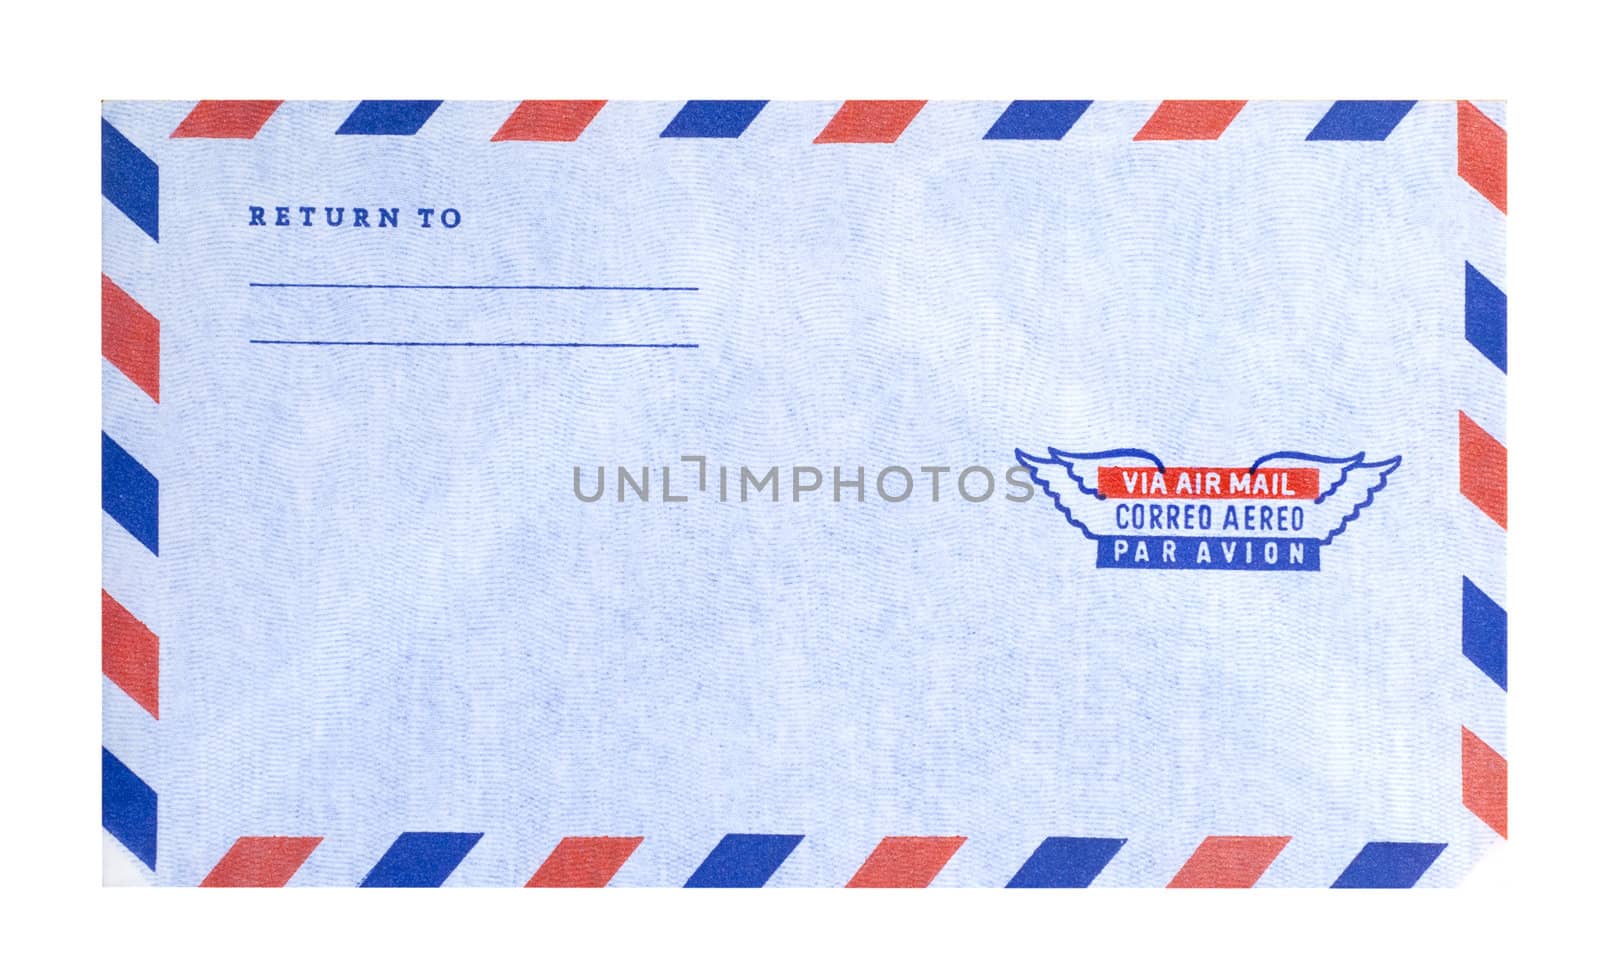 Air mail envelope isolated on white with clipping path